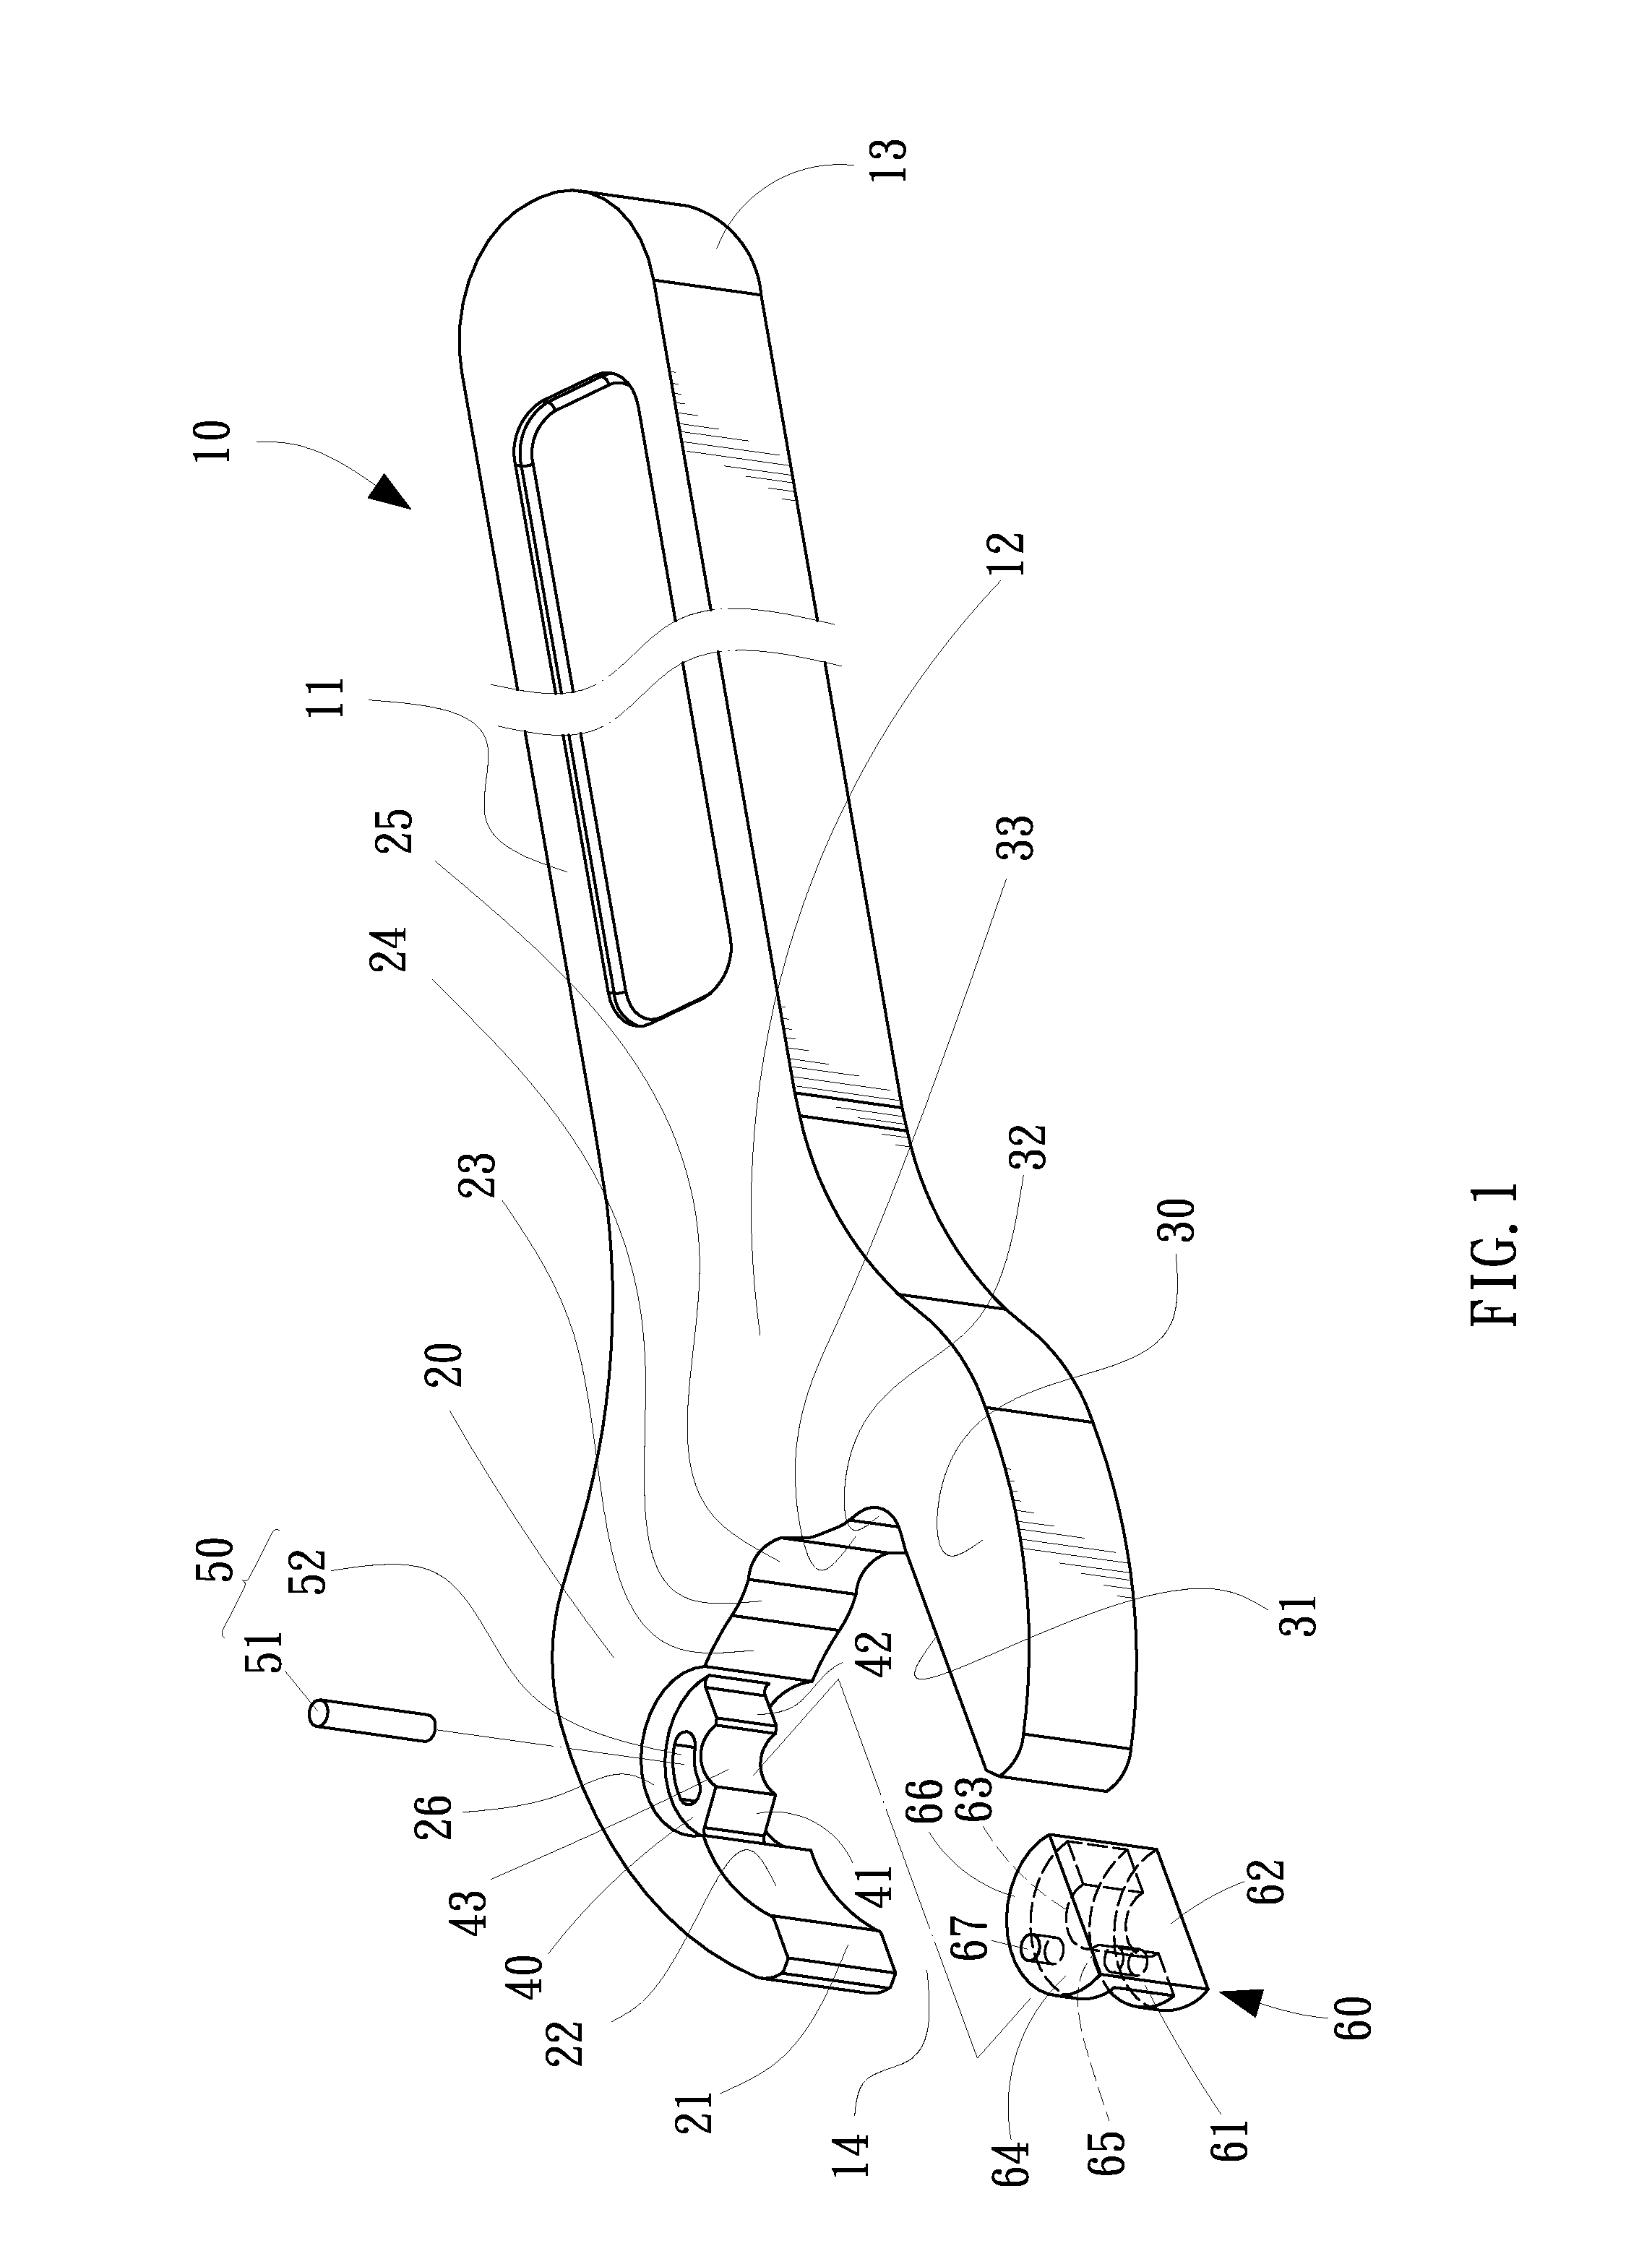 One-way open-end wrench